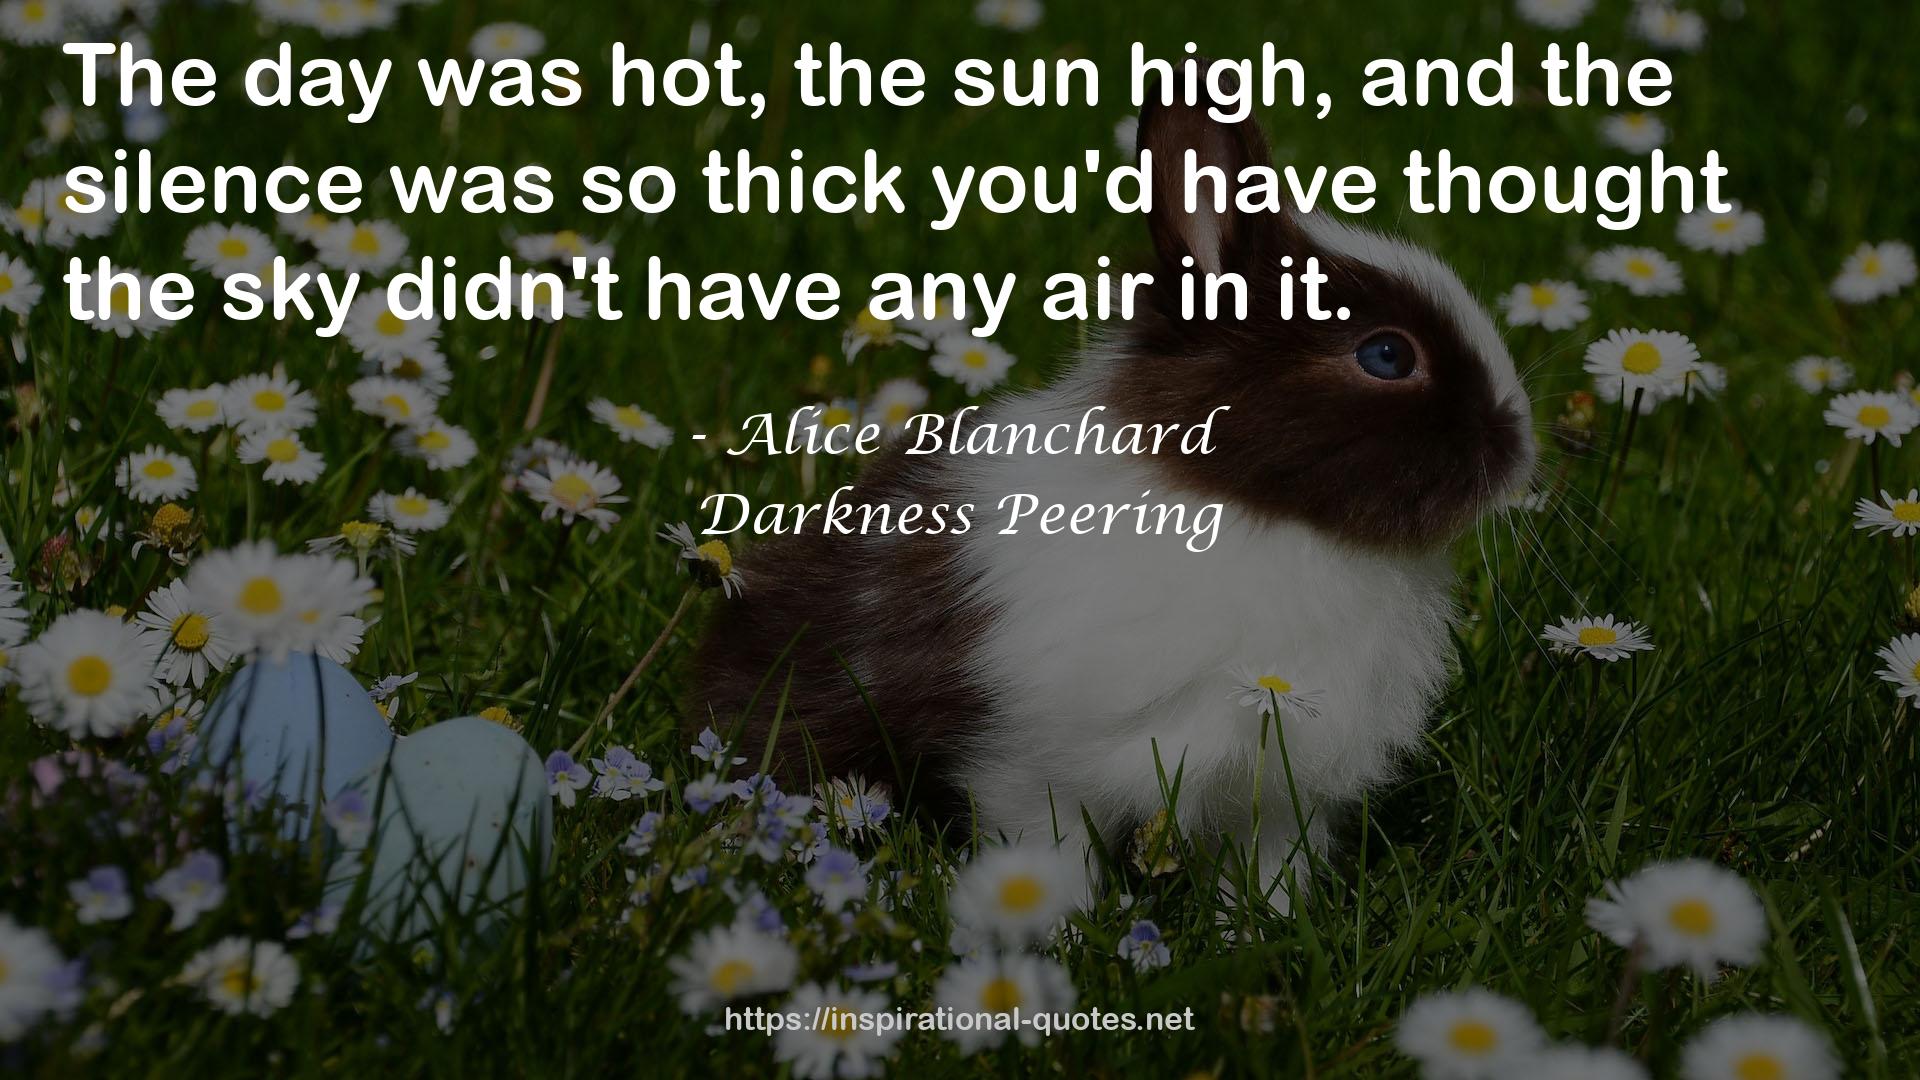 Alice Blanchard QUOTES